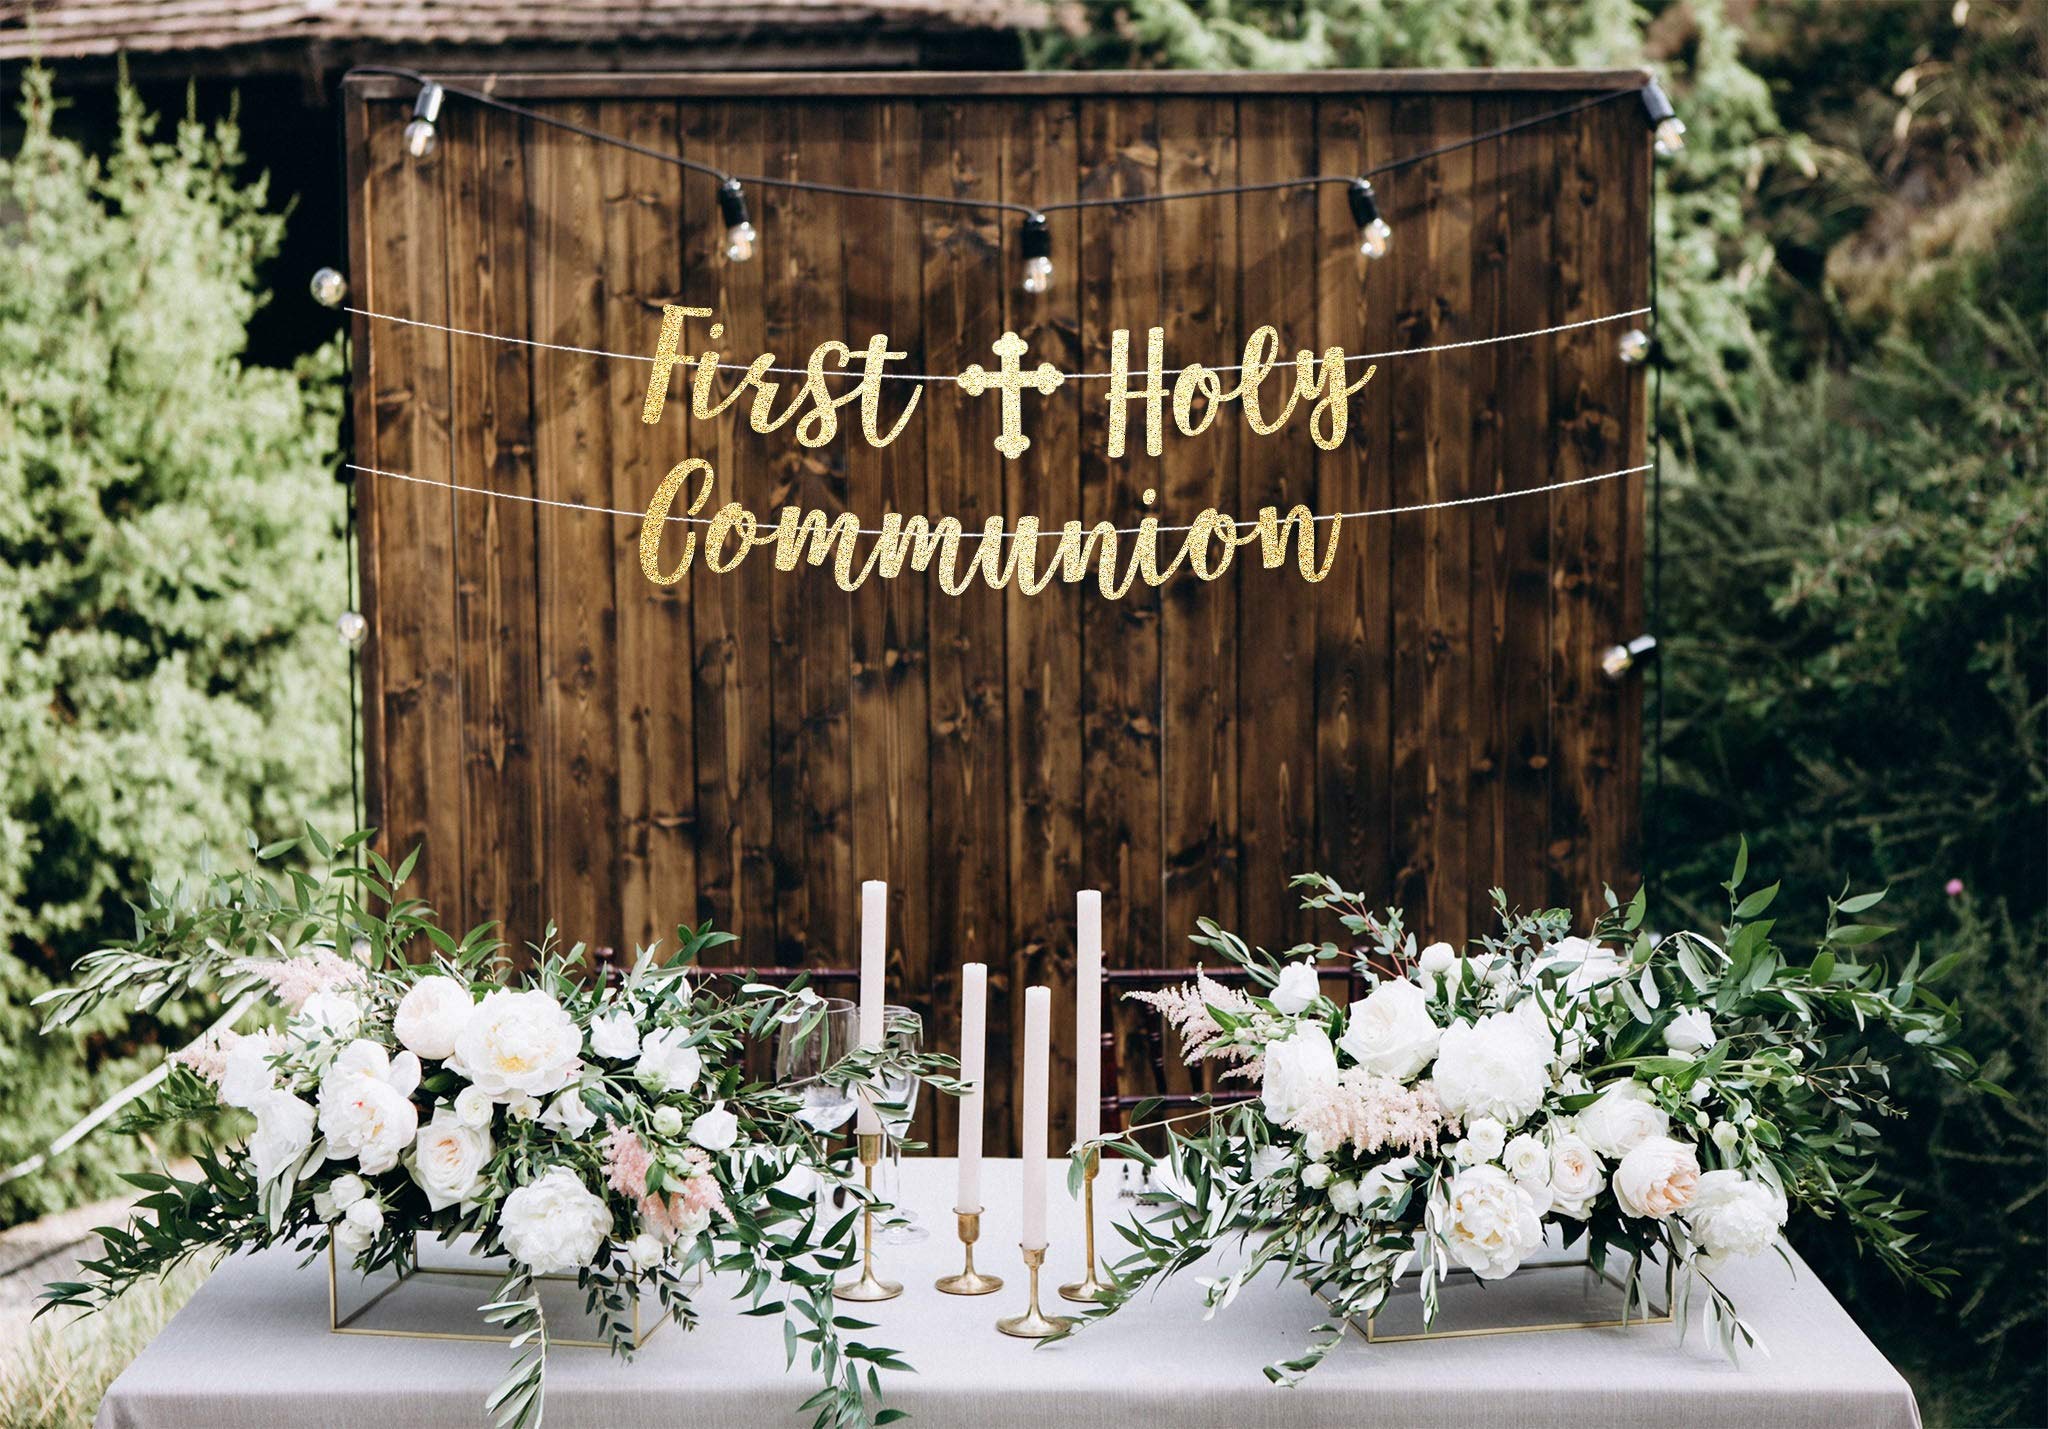 First Holy Communion: How to Organise Her Celebration Party